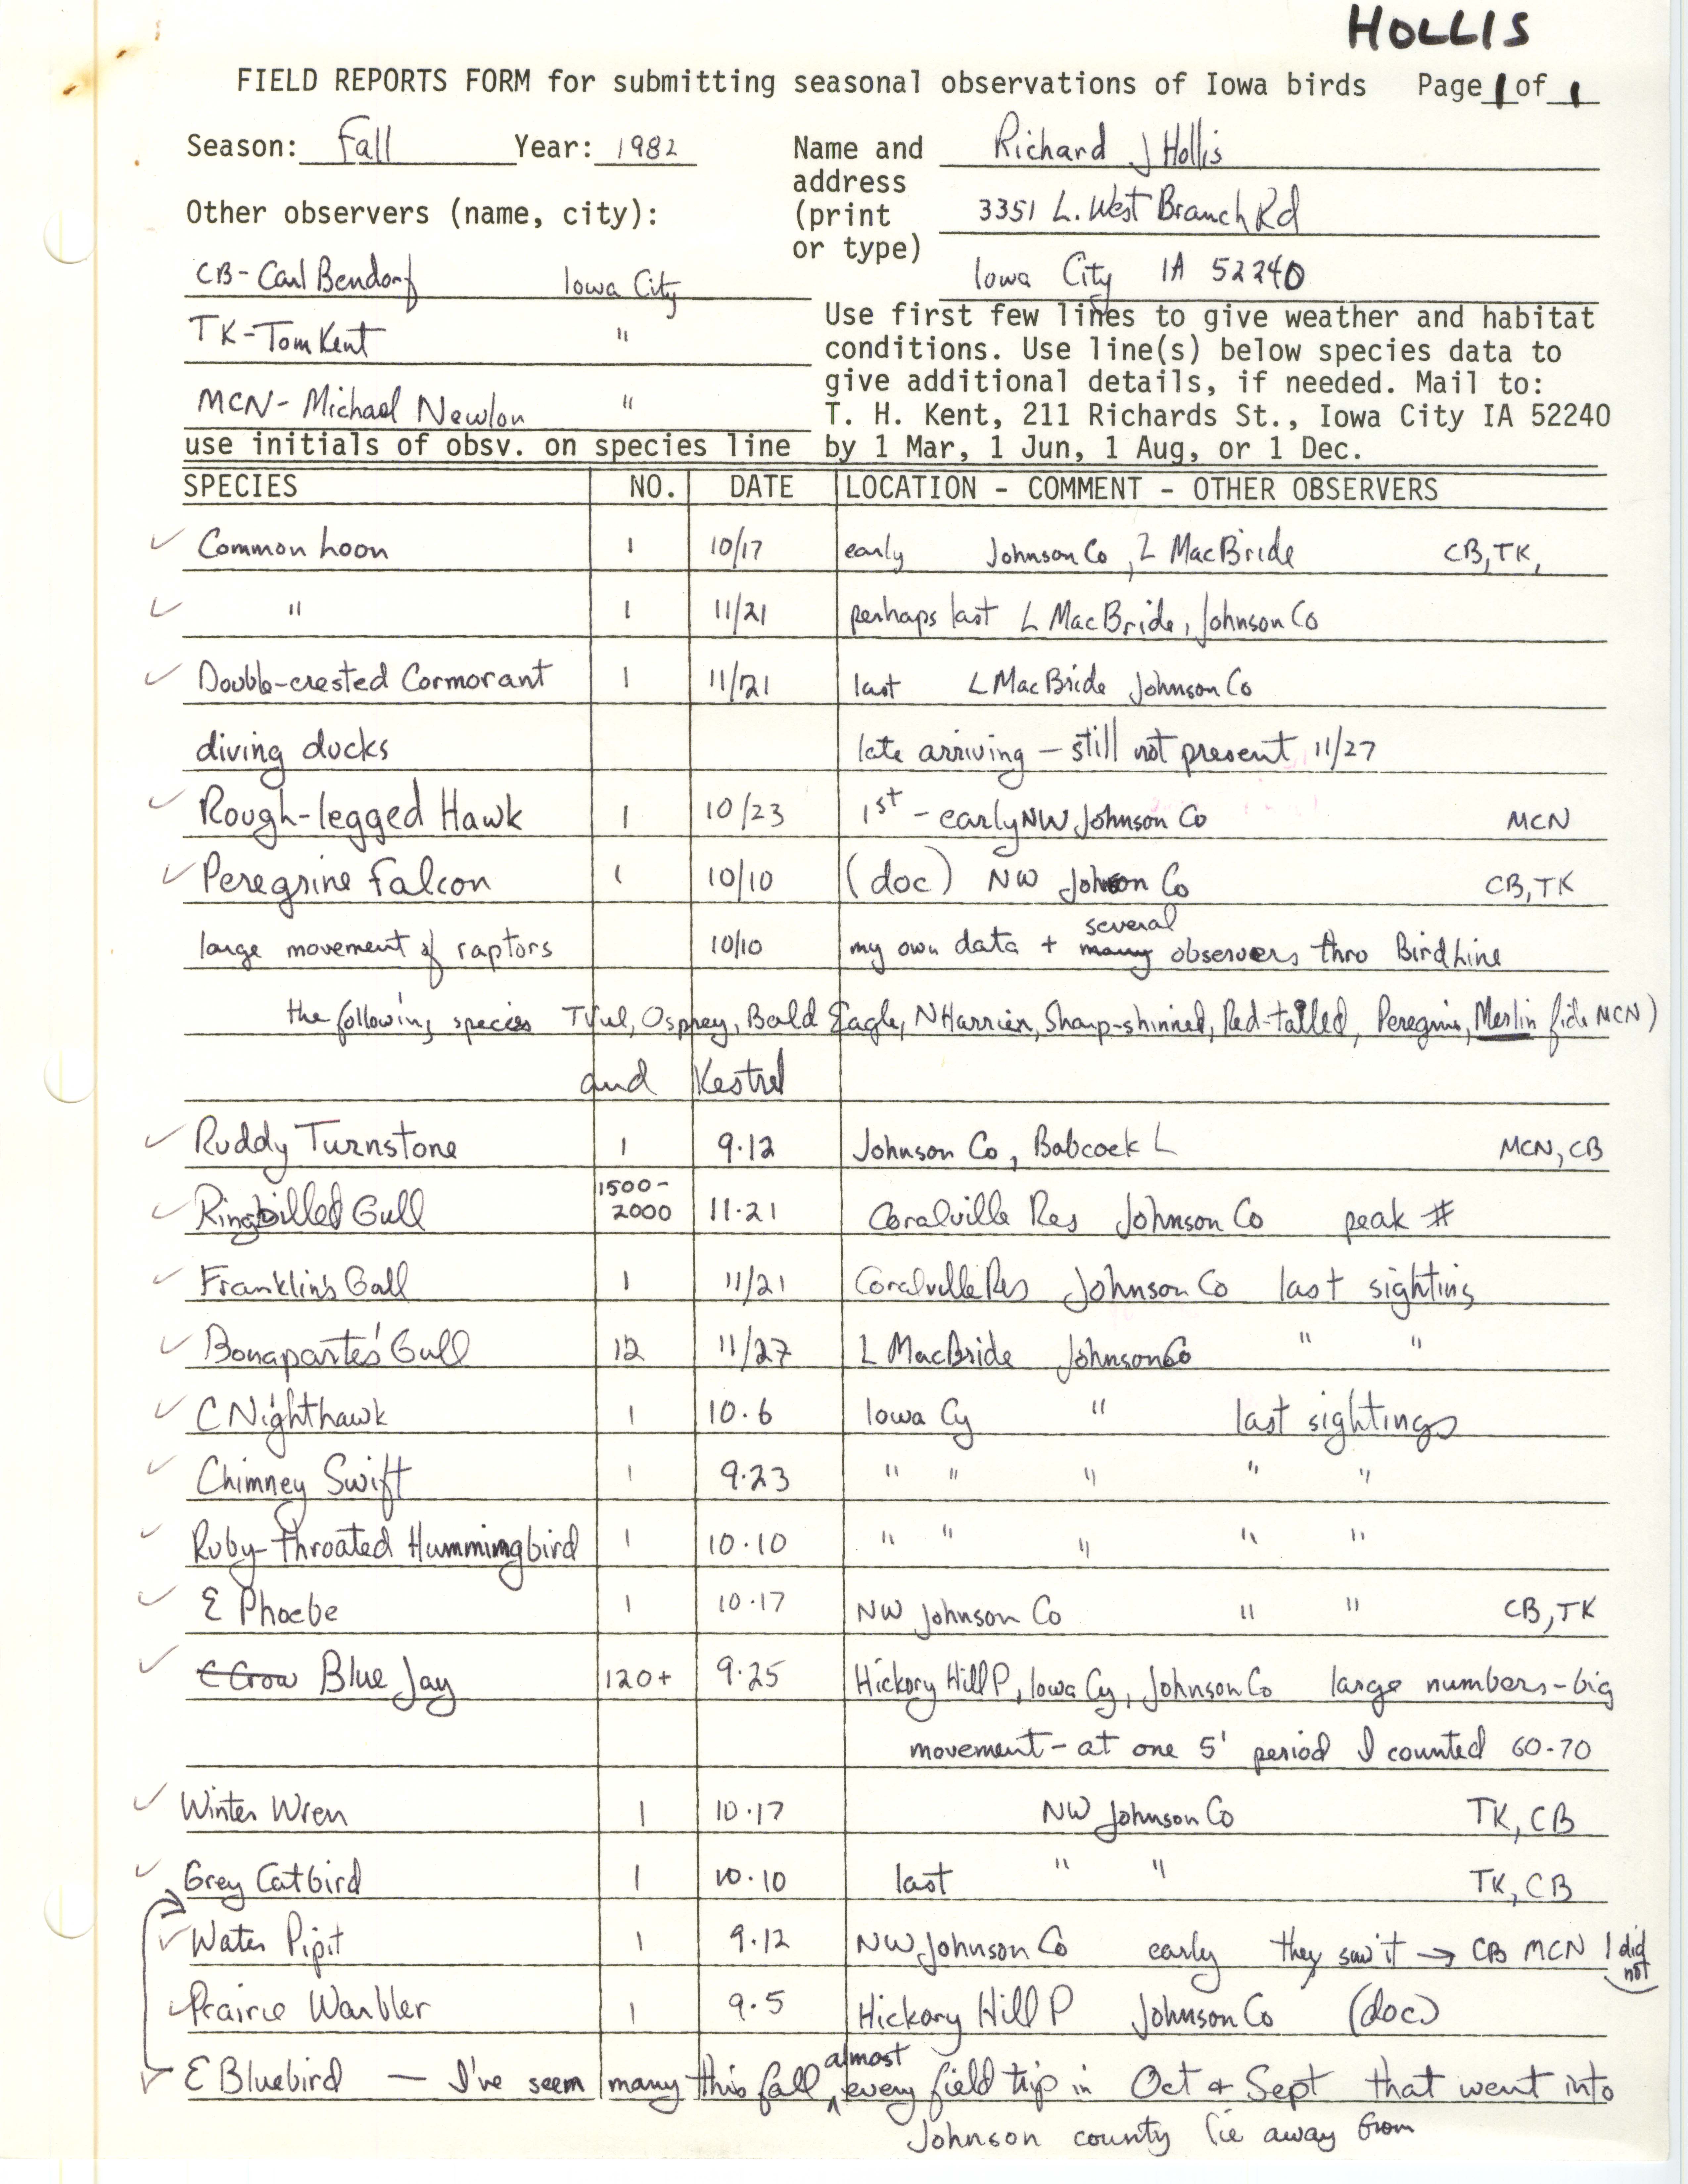 Field report contributed by Richard J. Hollis for fall 1982